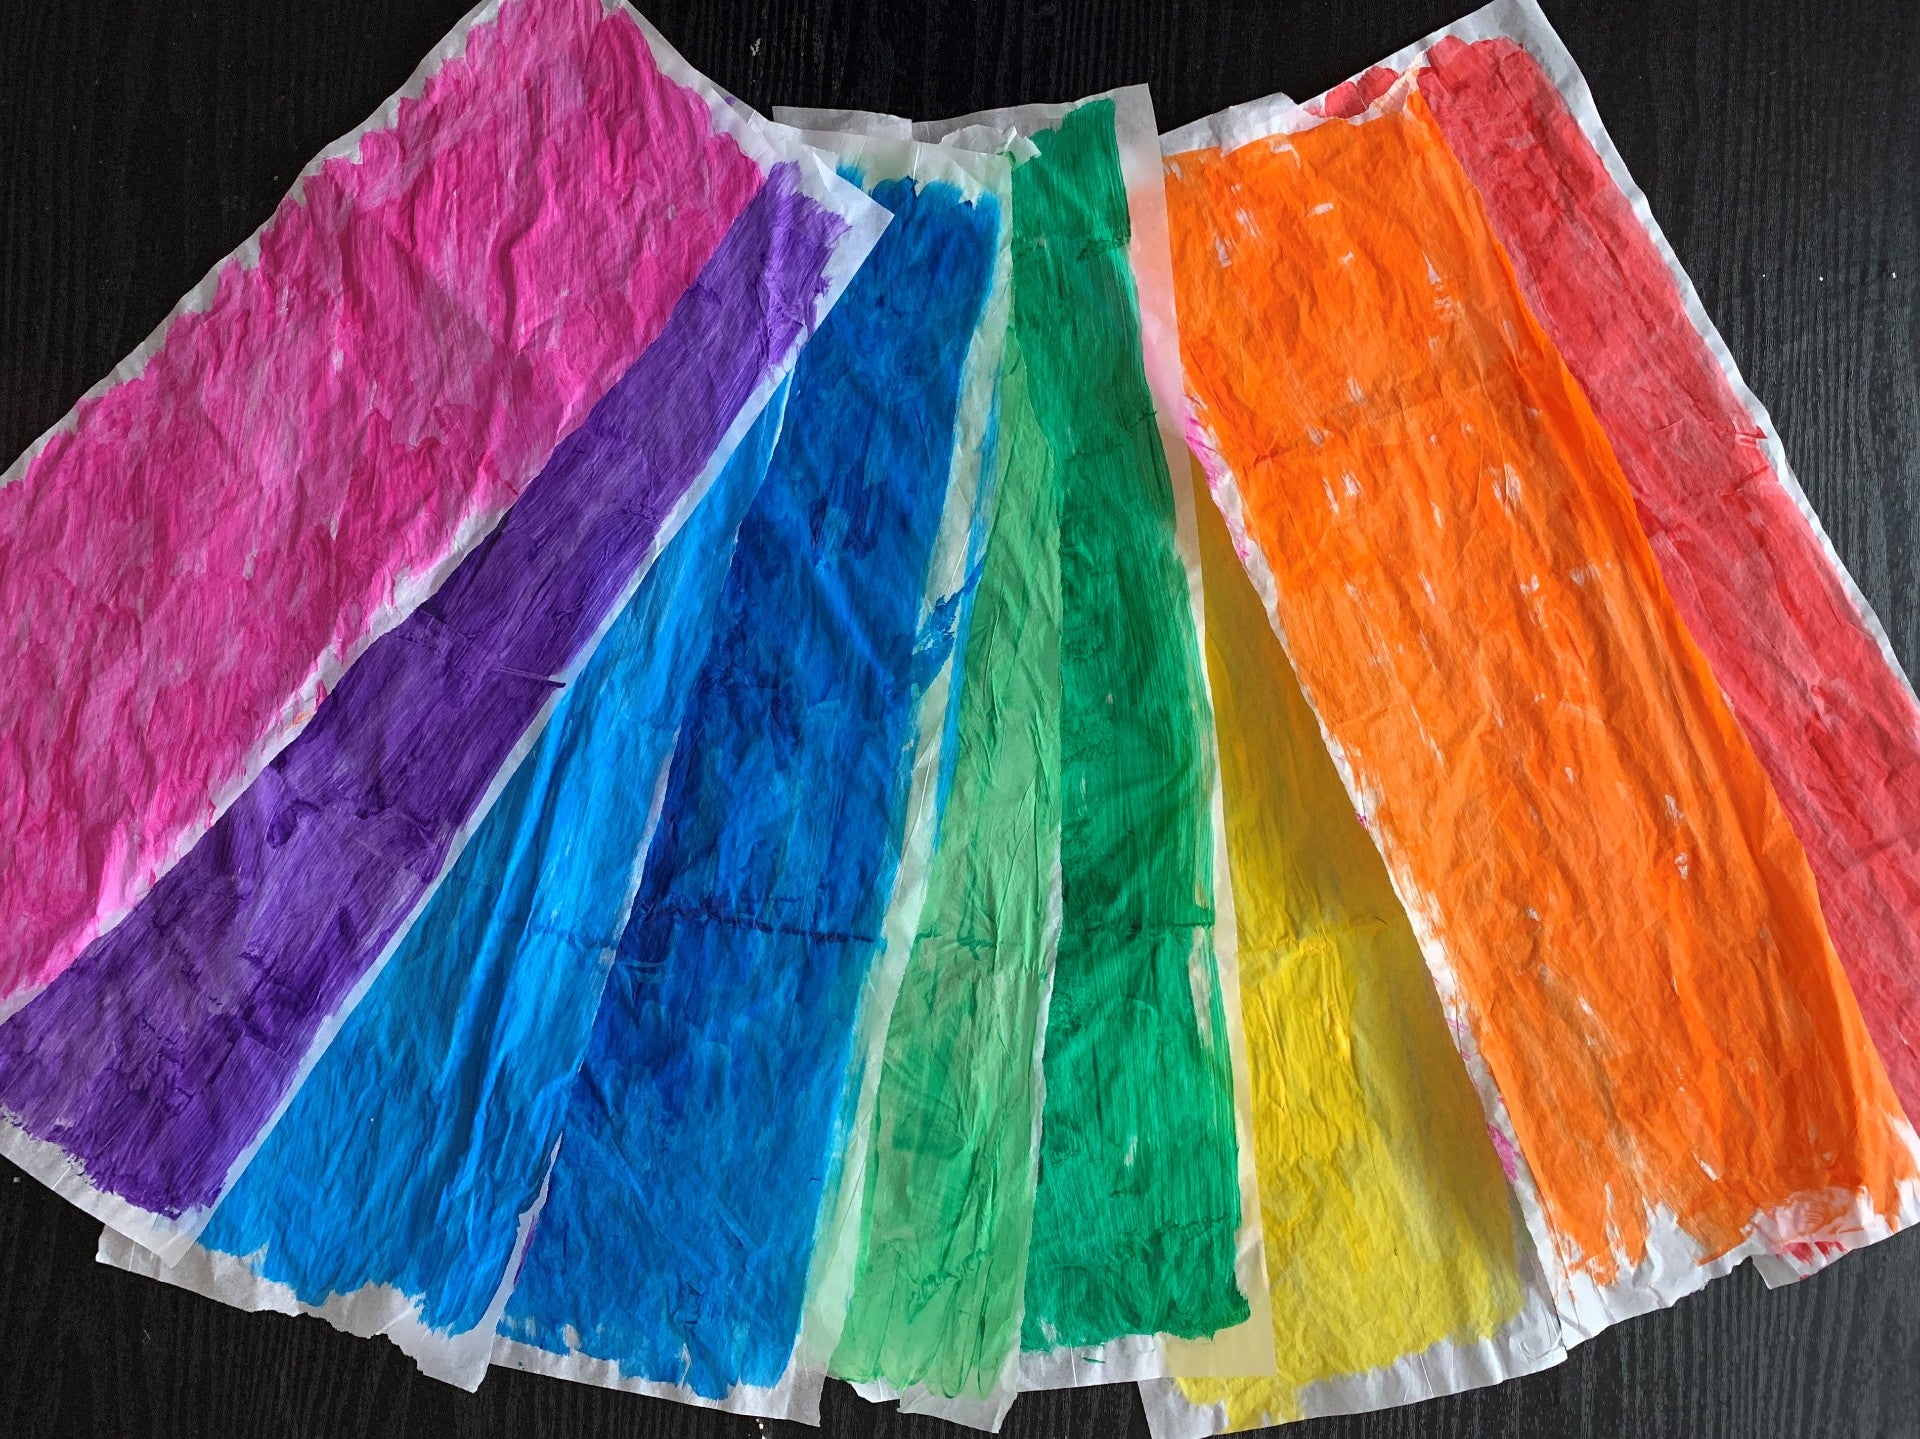 Painted tissue paper in rainbow colors arranged like a fan